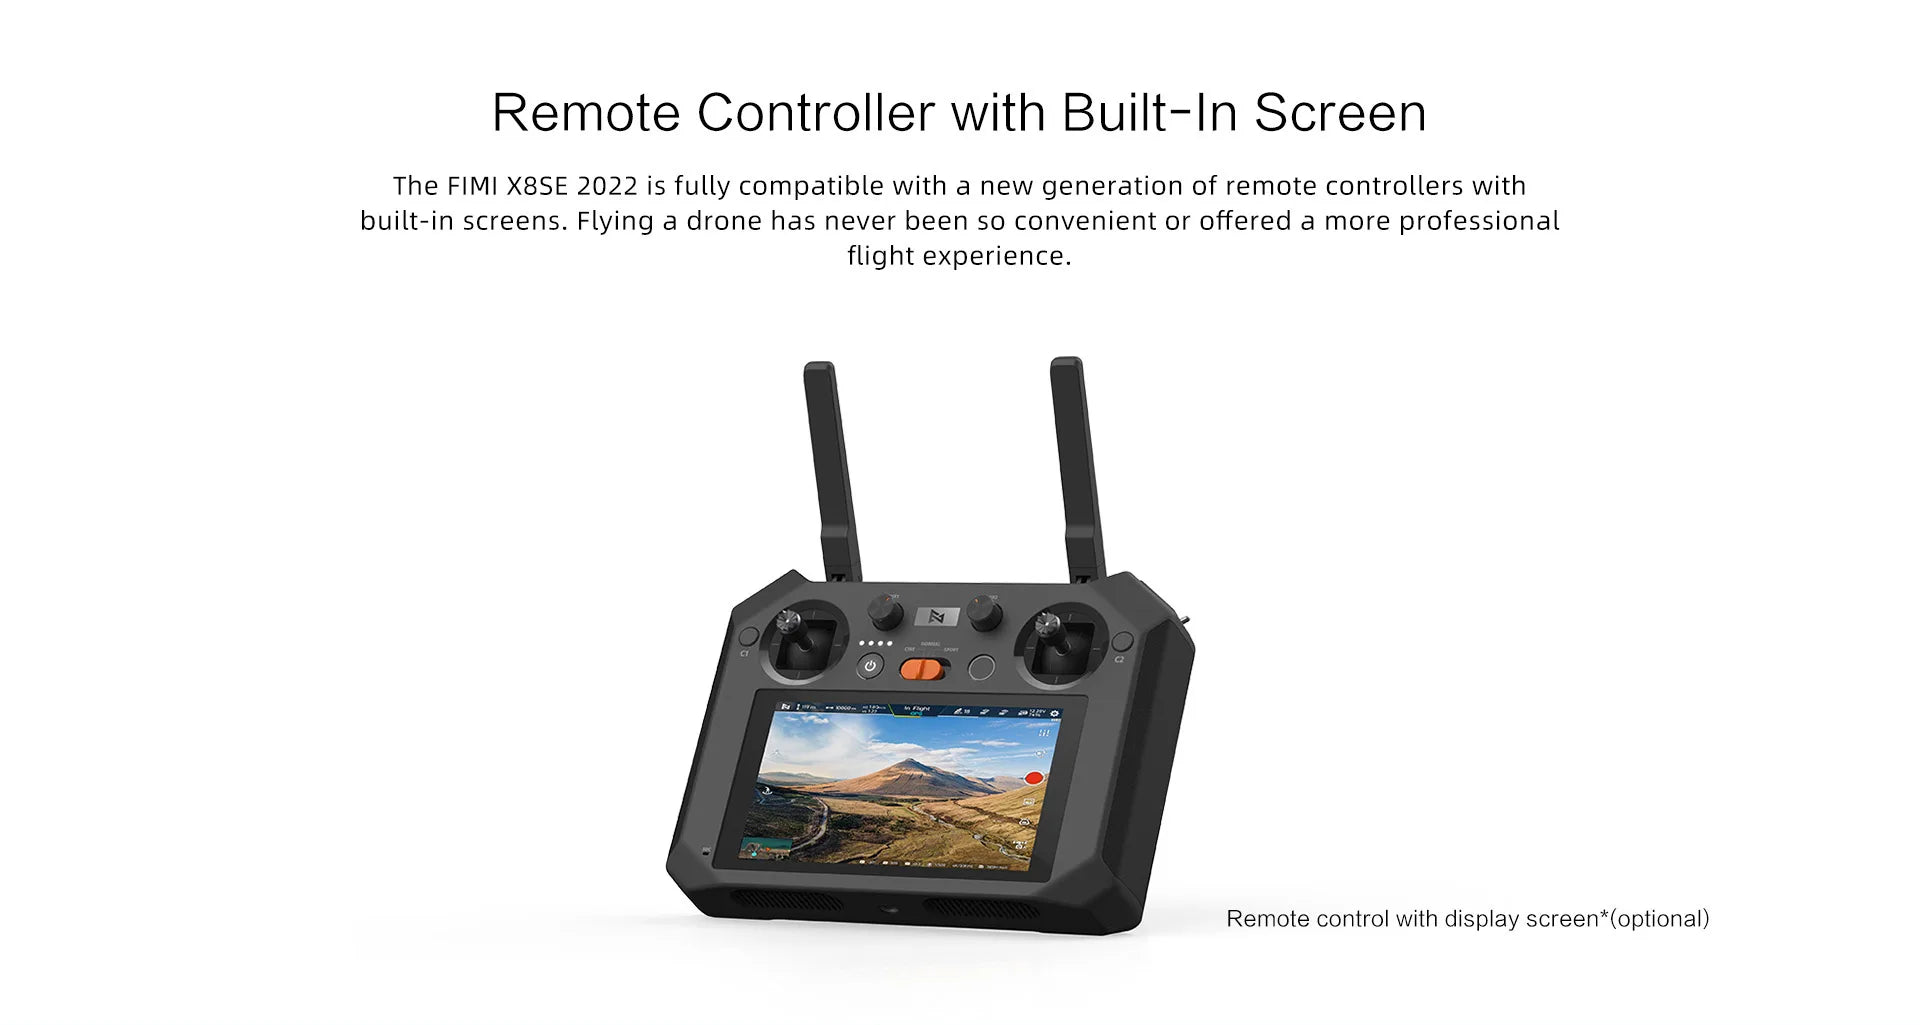 FIMI X8se 2022 V2 Drone, FIMI X8SE 2022 is fully compatible with a new generation of remote